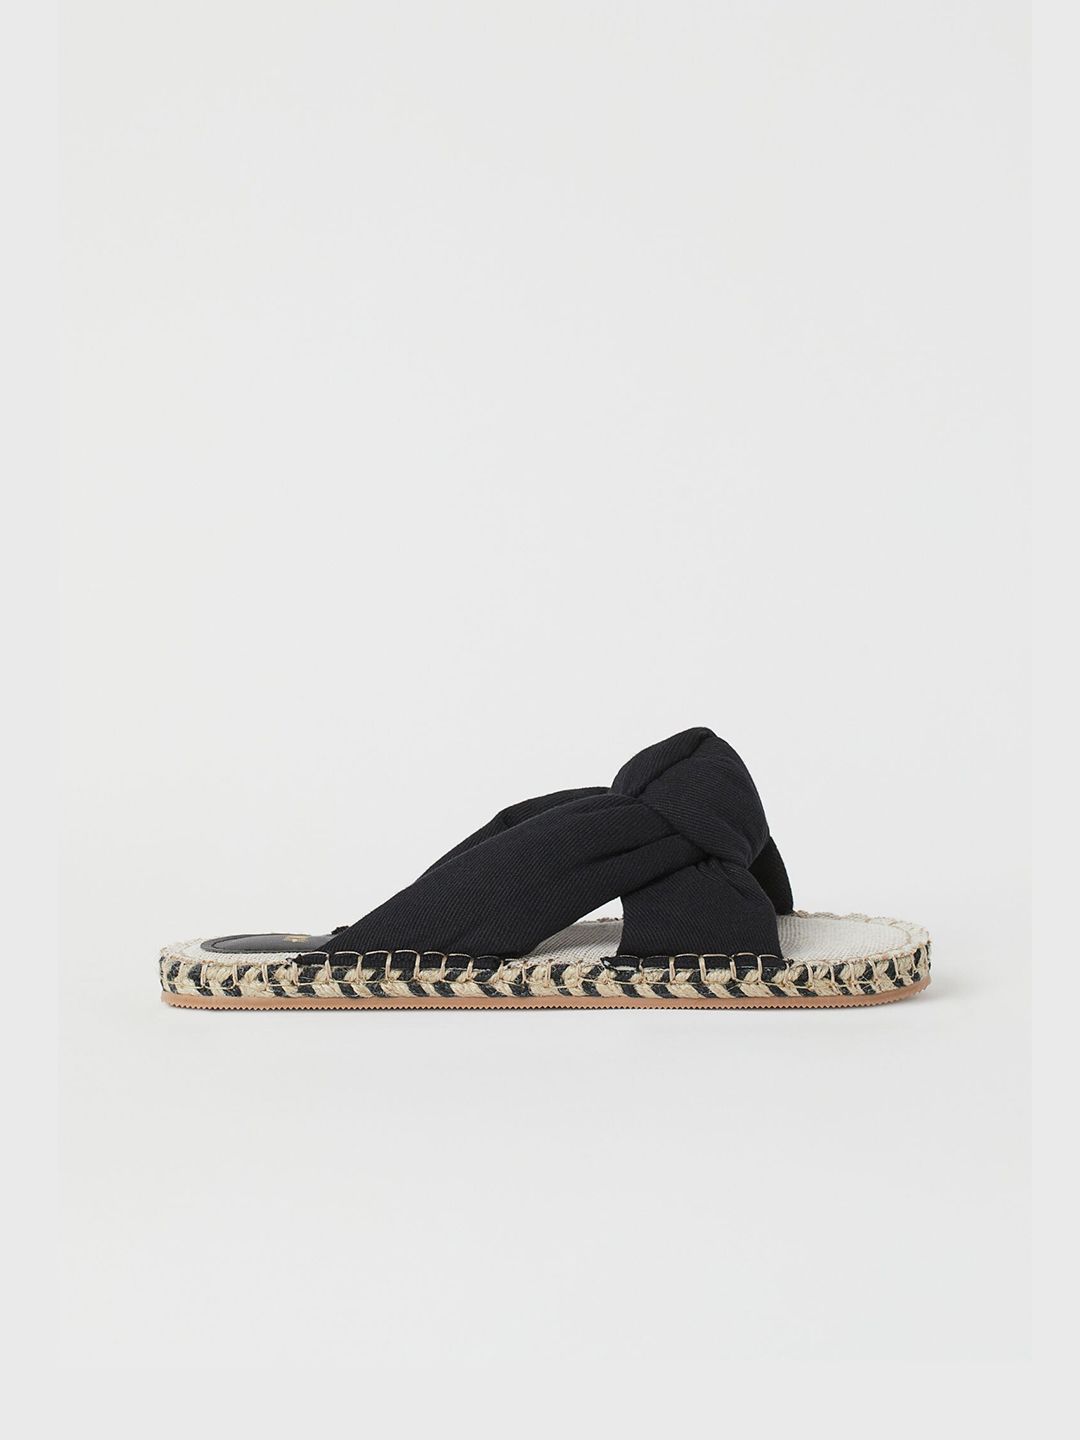 H&M Women Black Knot-Detail Sandals Price in India